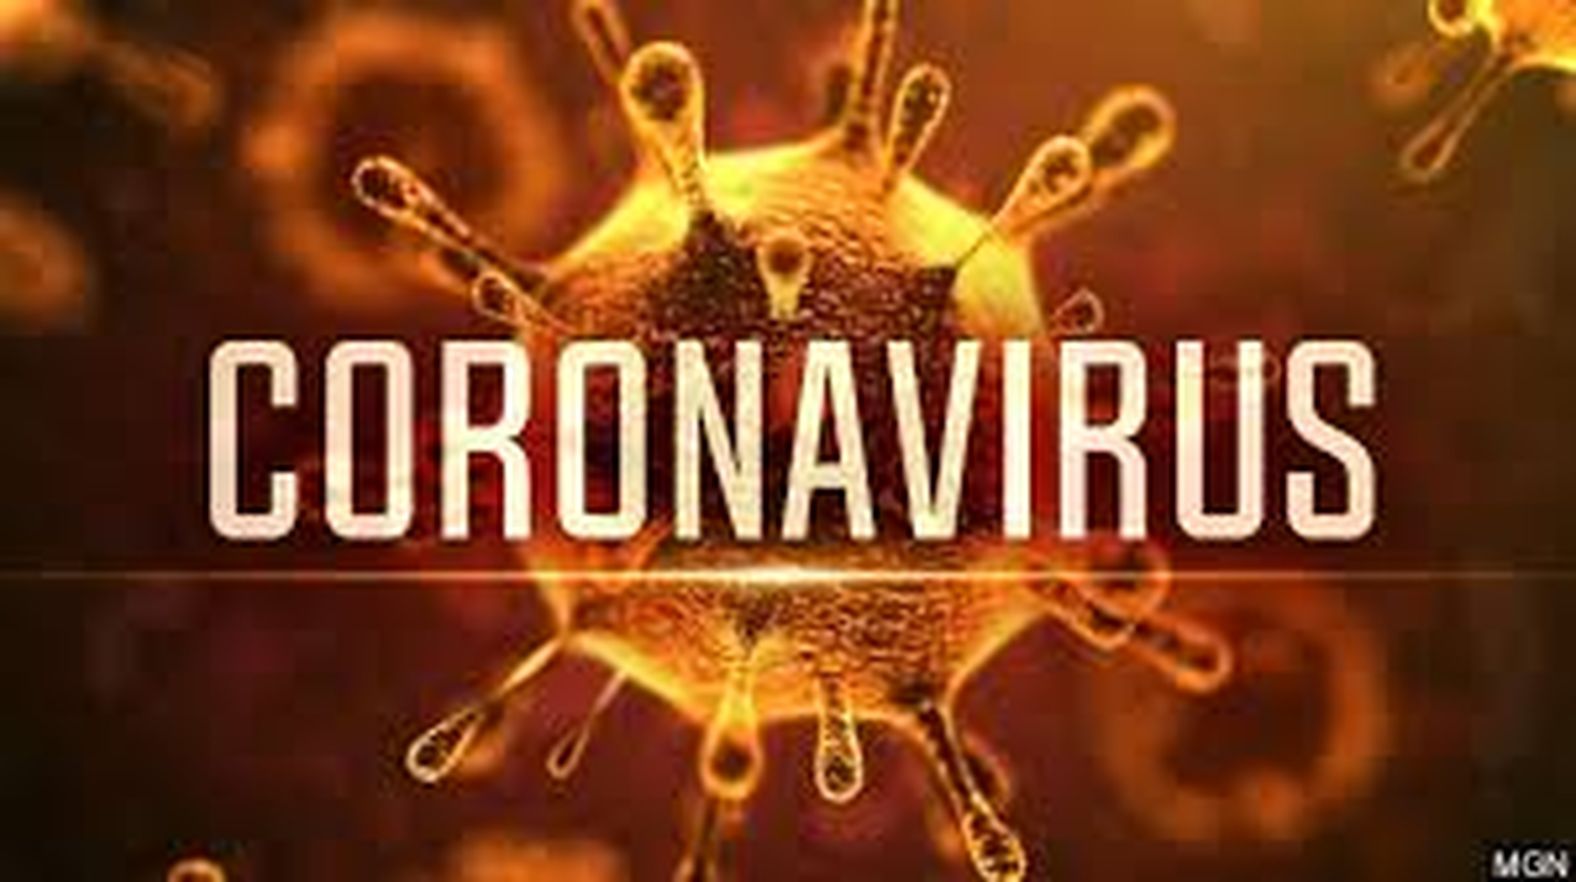  Corona virus: Schools and theaters will remain closed from today till 31